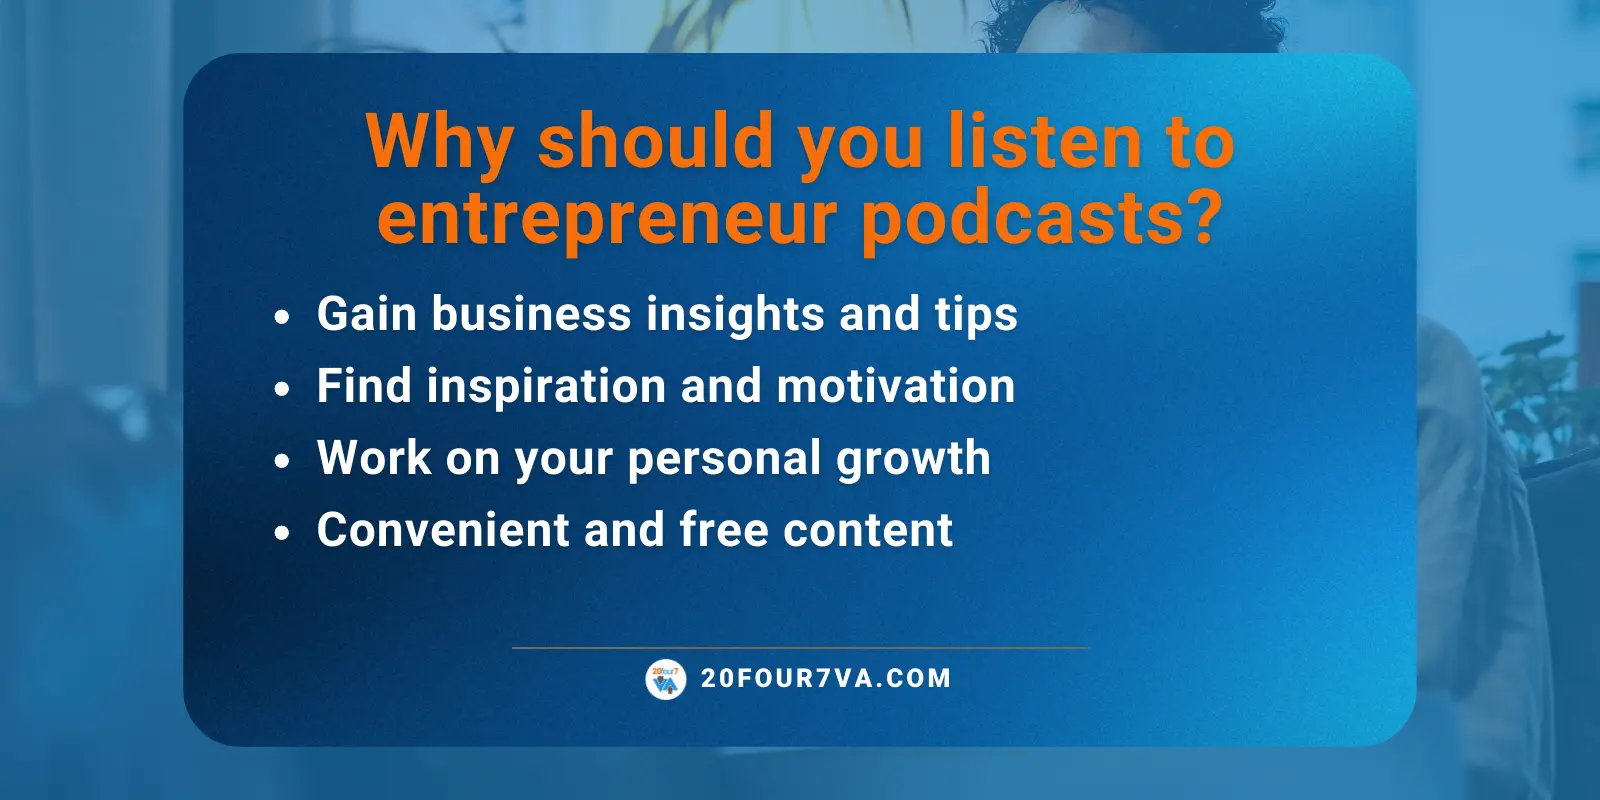 Why should you listen to entrepreneur podcasts